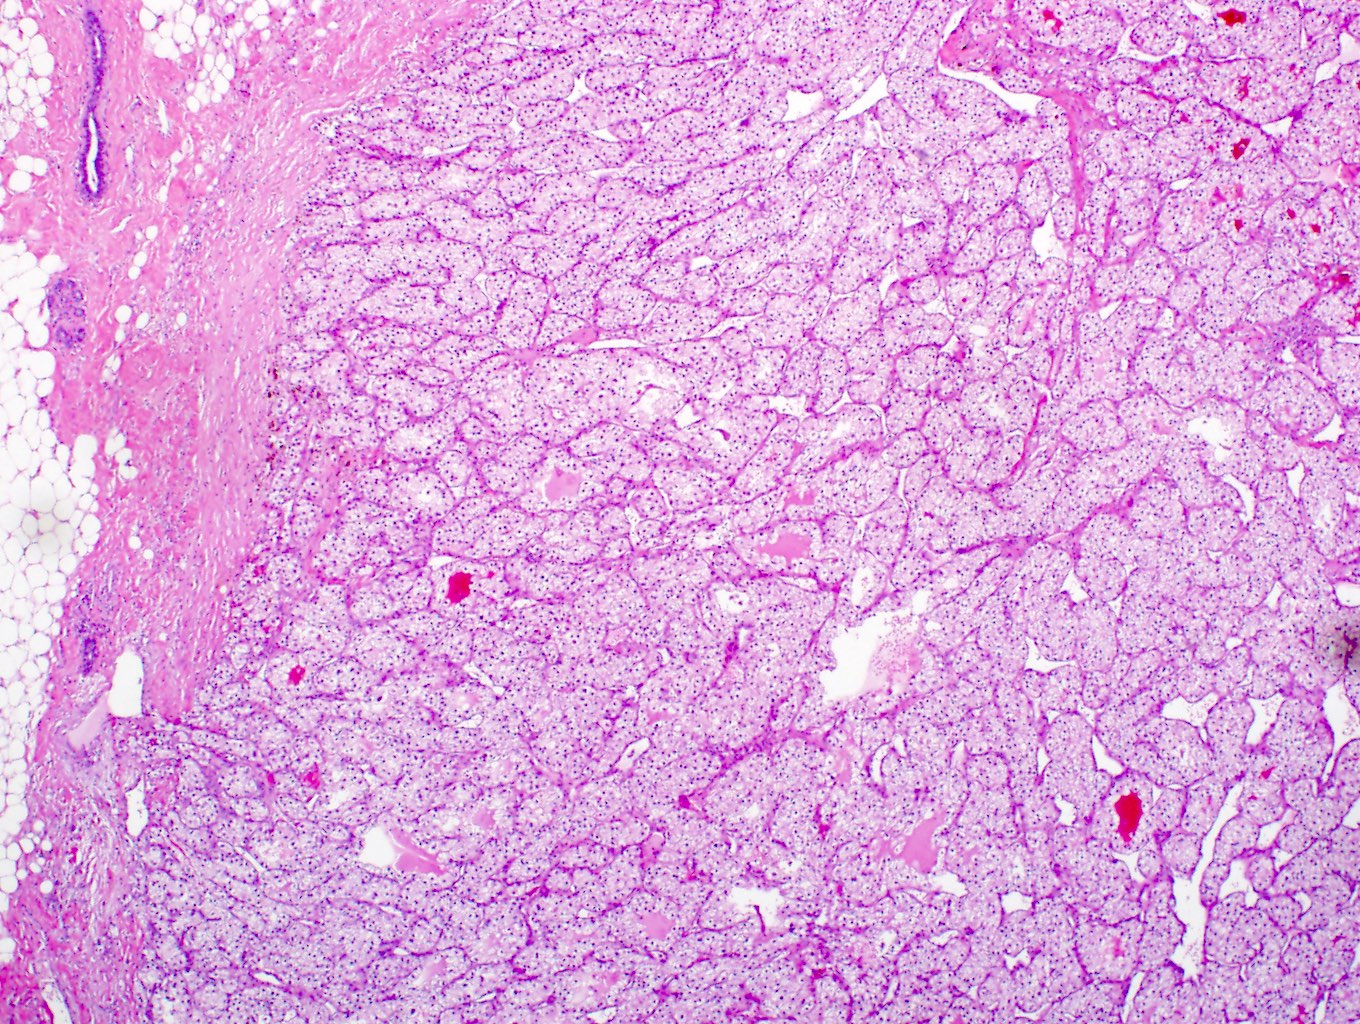 Metastatic clear cell renal cell carcinoma